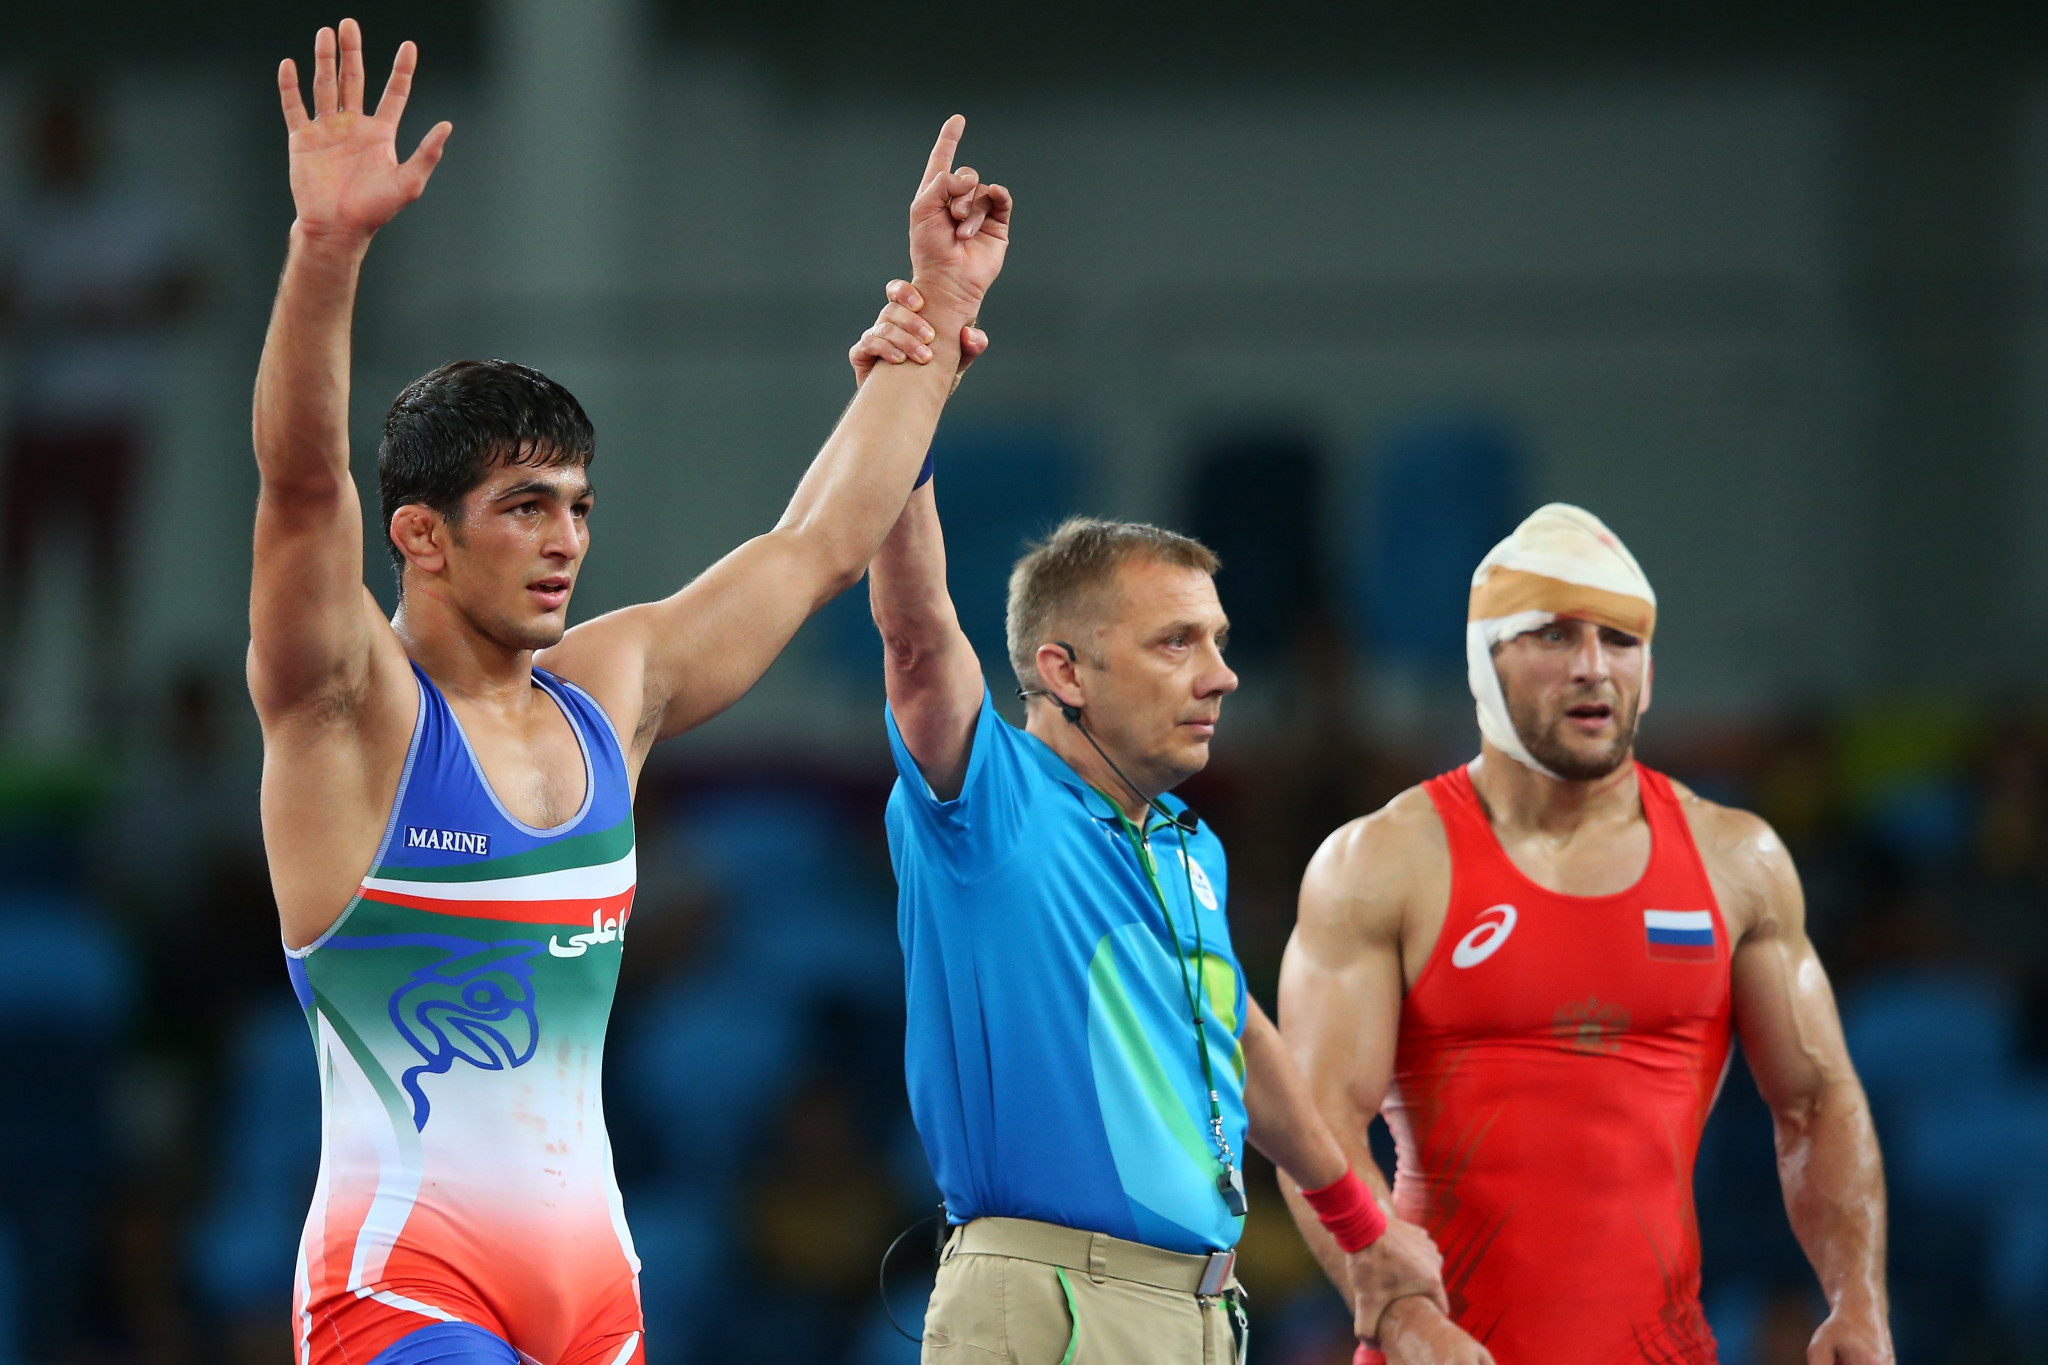 Hassan Yazdani earned gold in the men's freestyle 74 kilogram contest at Rio 2016 ©Getty Images